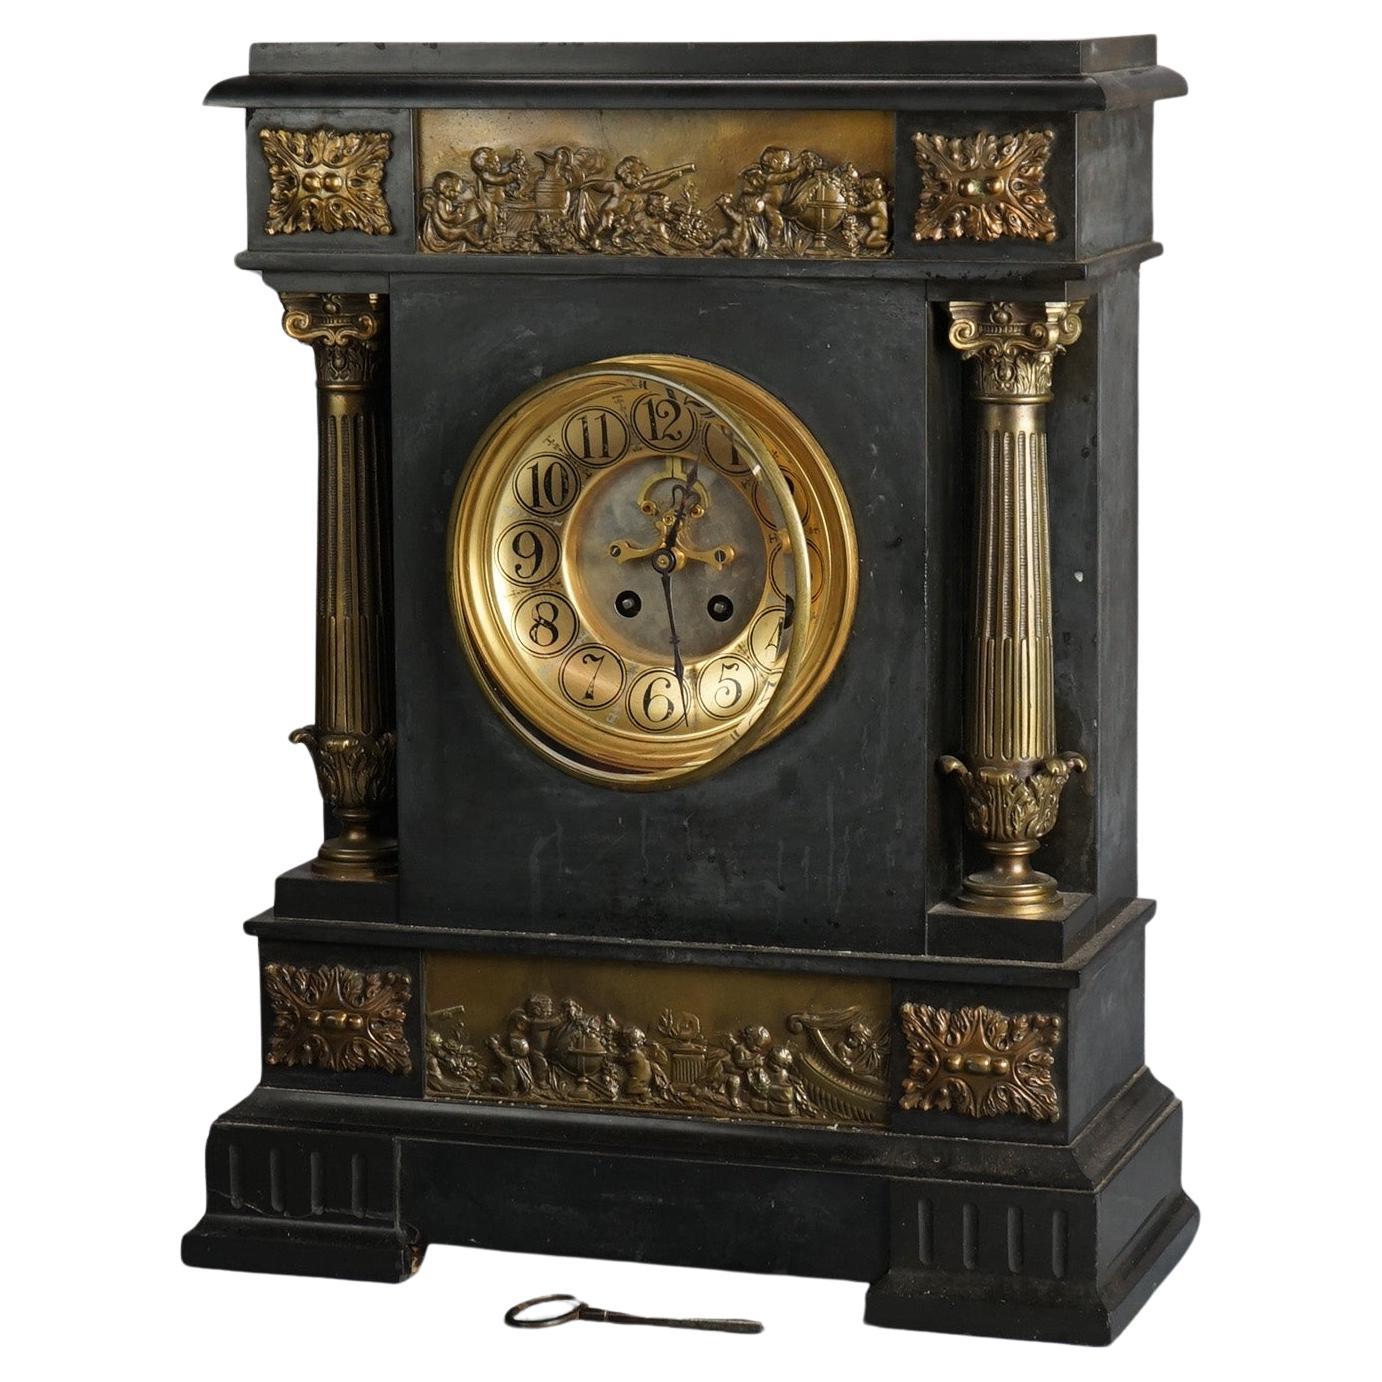 Antique Neoclassical Second Empire Black Marble Mantle Clock with Cherub Plaques For Sale